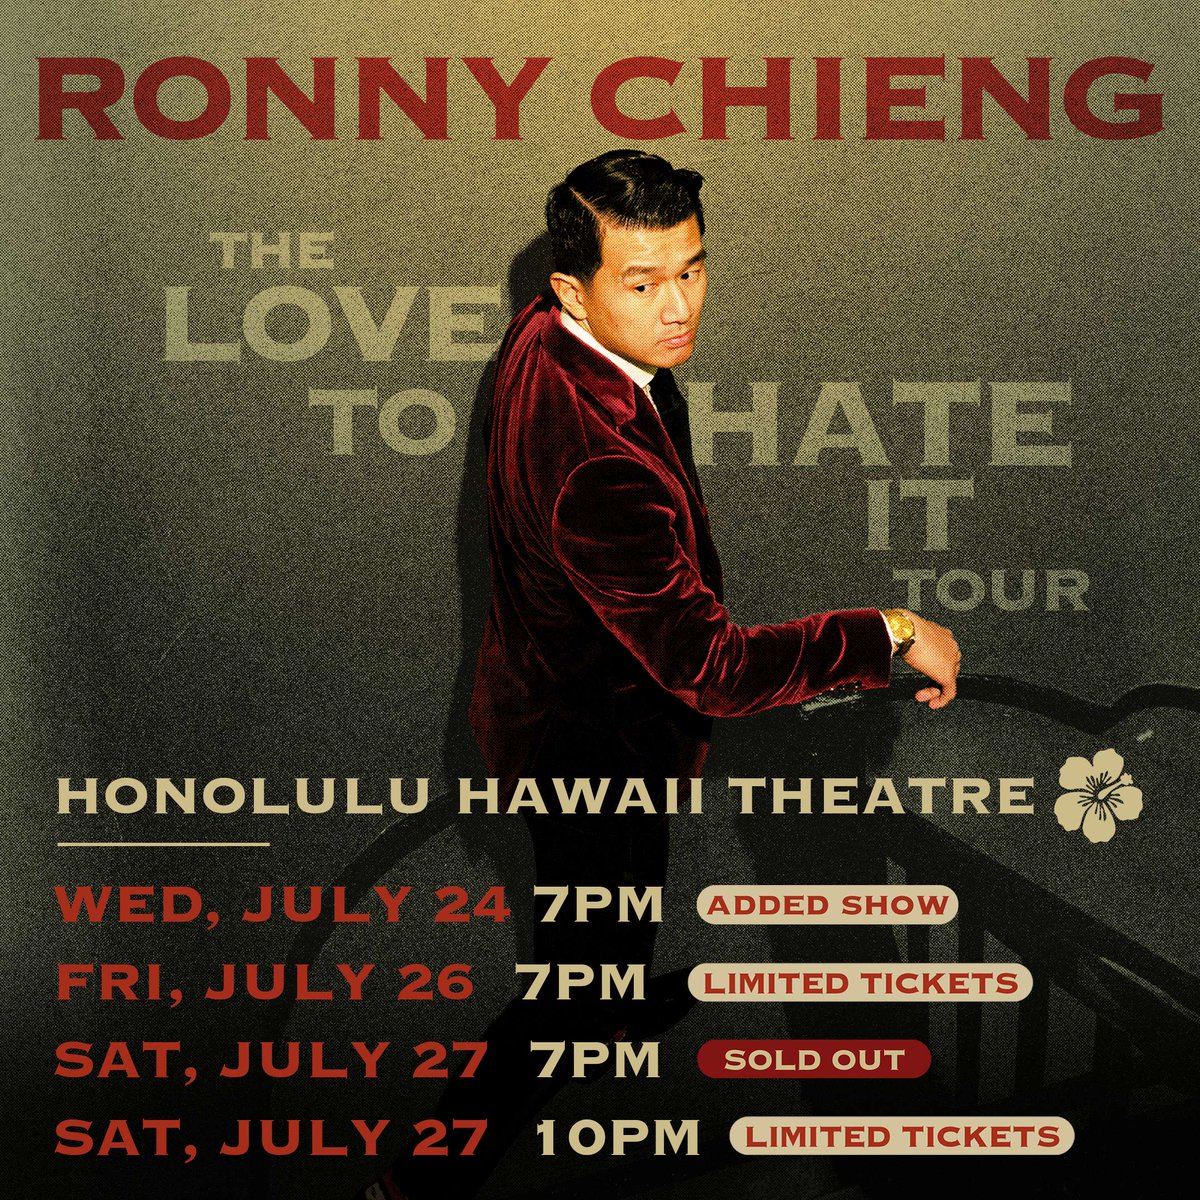 Tickets for @ronnychieng's newly added show on July 24th are on-sale now for members only 🎉 To get early access to tickets and more visit hawaiitheatre.com/membership